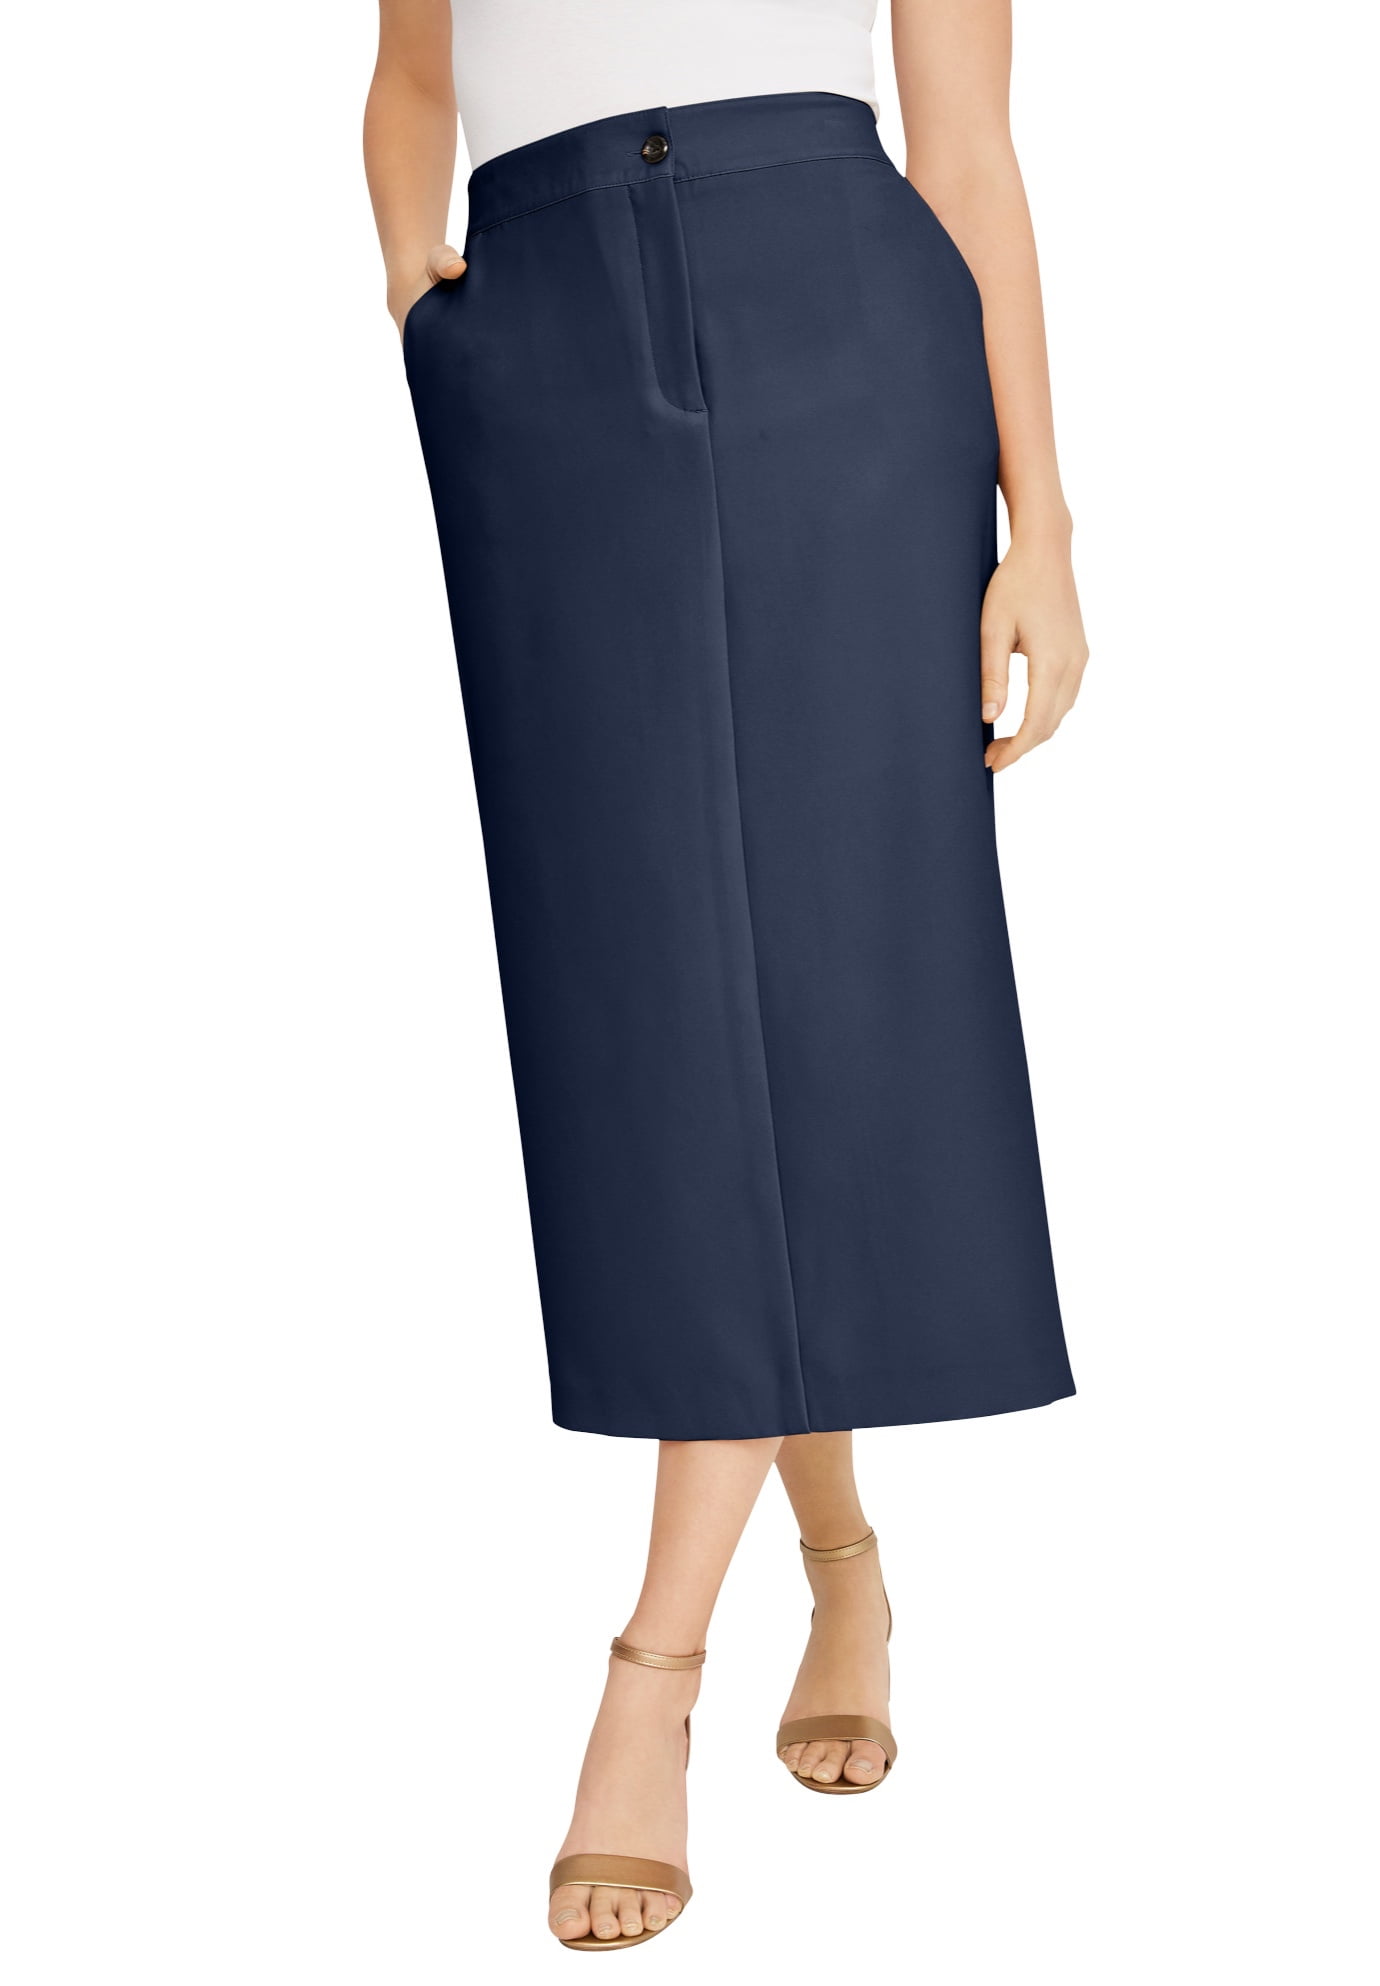 Calf Length Washable Lined Pencil Skirt Back Detail Navy Blue NEW 10-22 